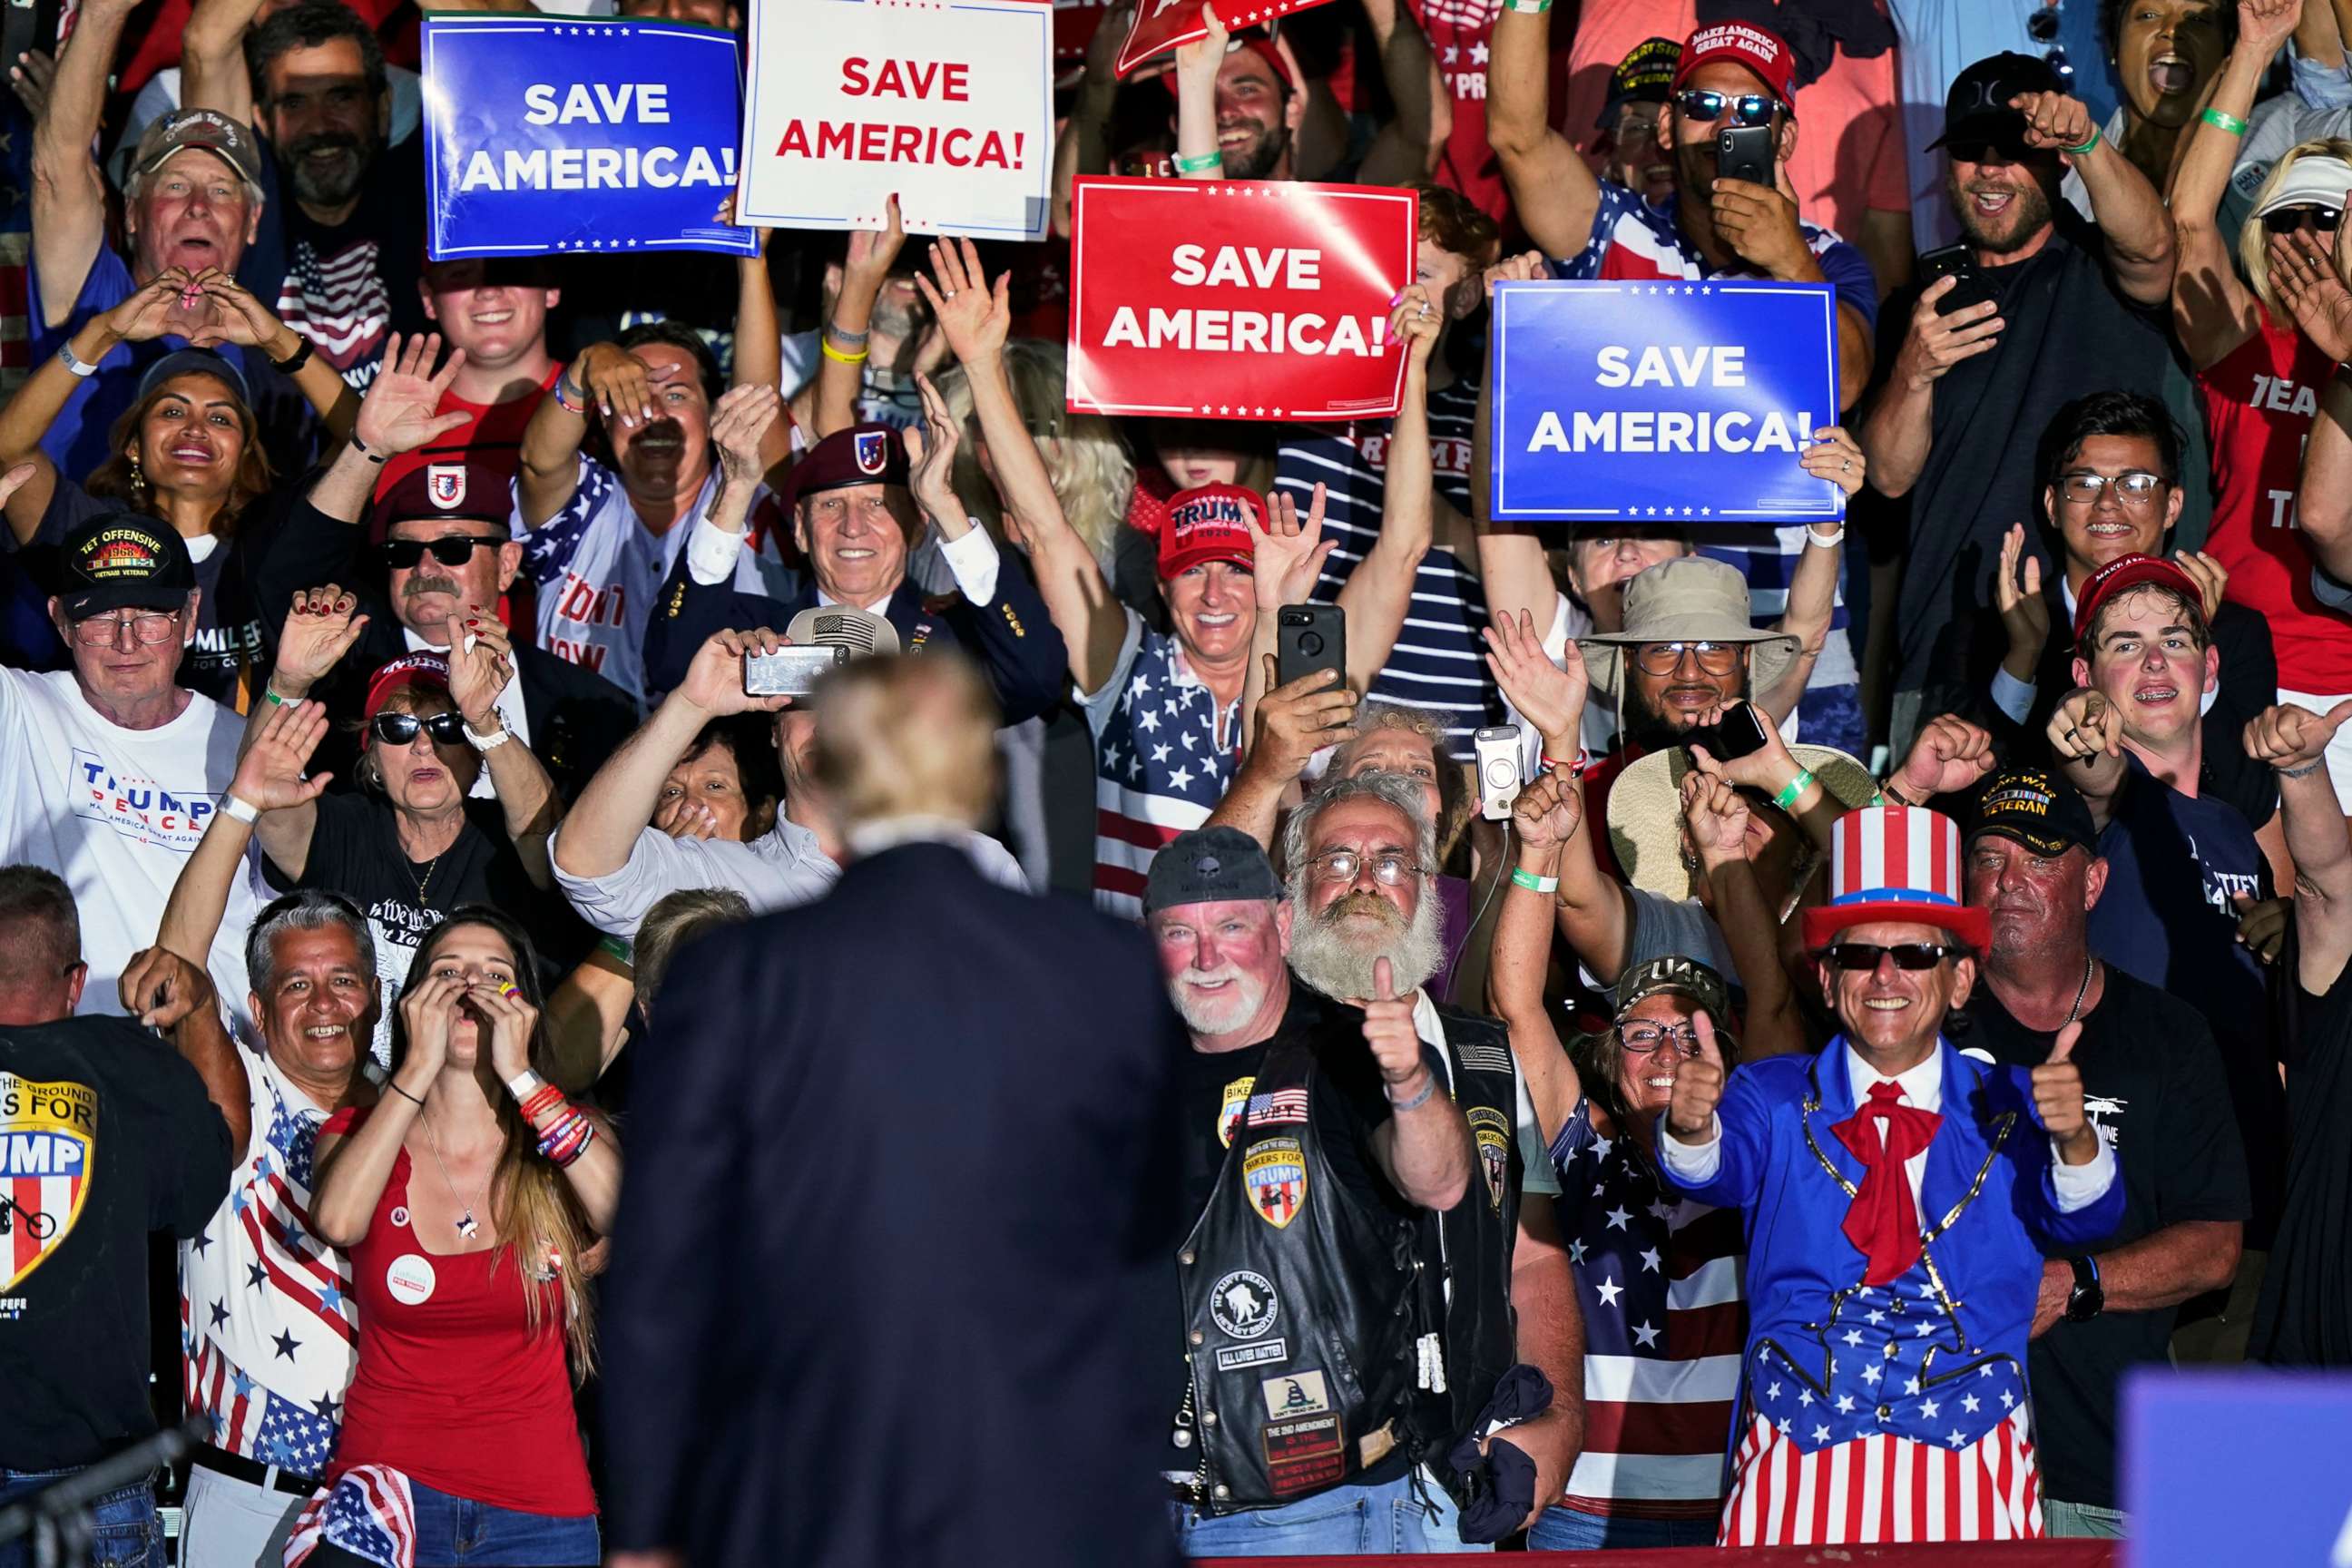 PHOTO: In this June 26, 2021, file photo, supporters cheer on former President Donald Trump after he spoke at a rally at the Lorain County Fairgrounds in Wellington, Ohio.